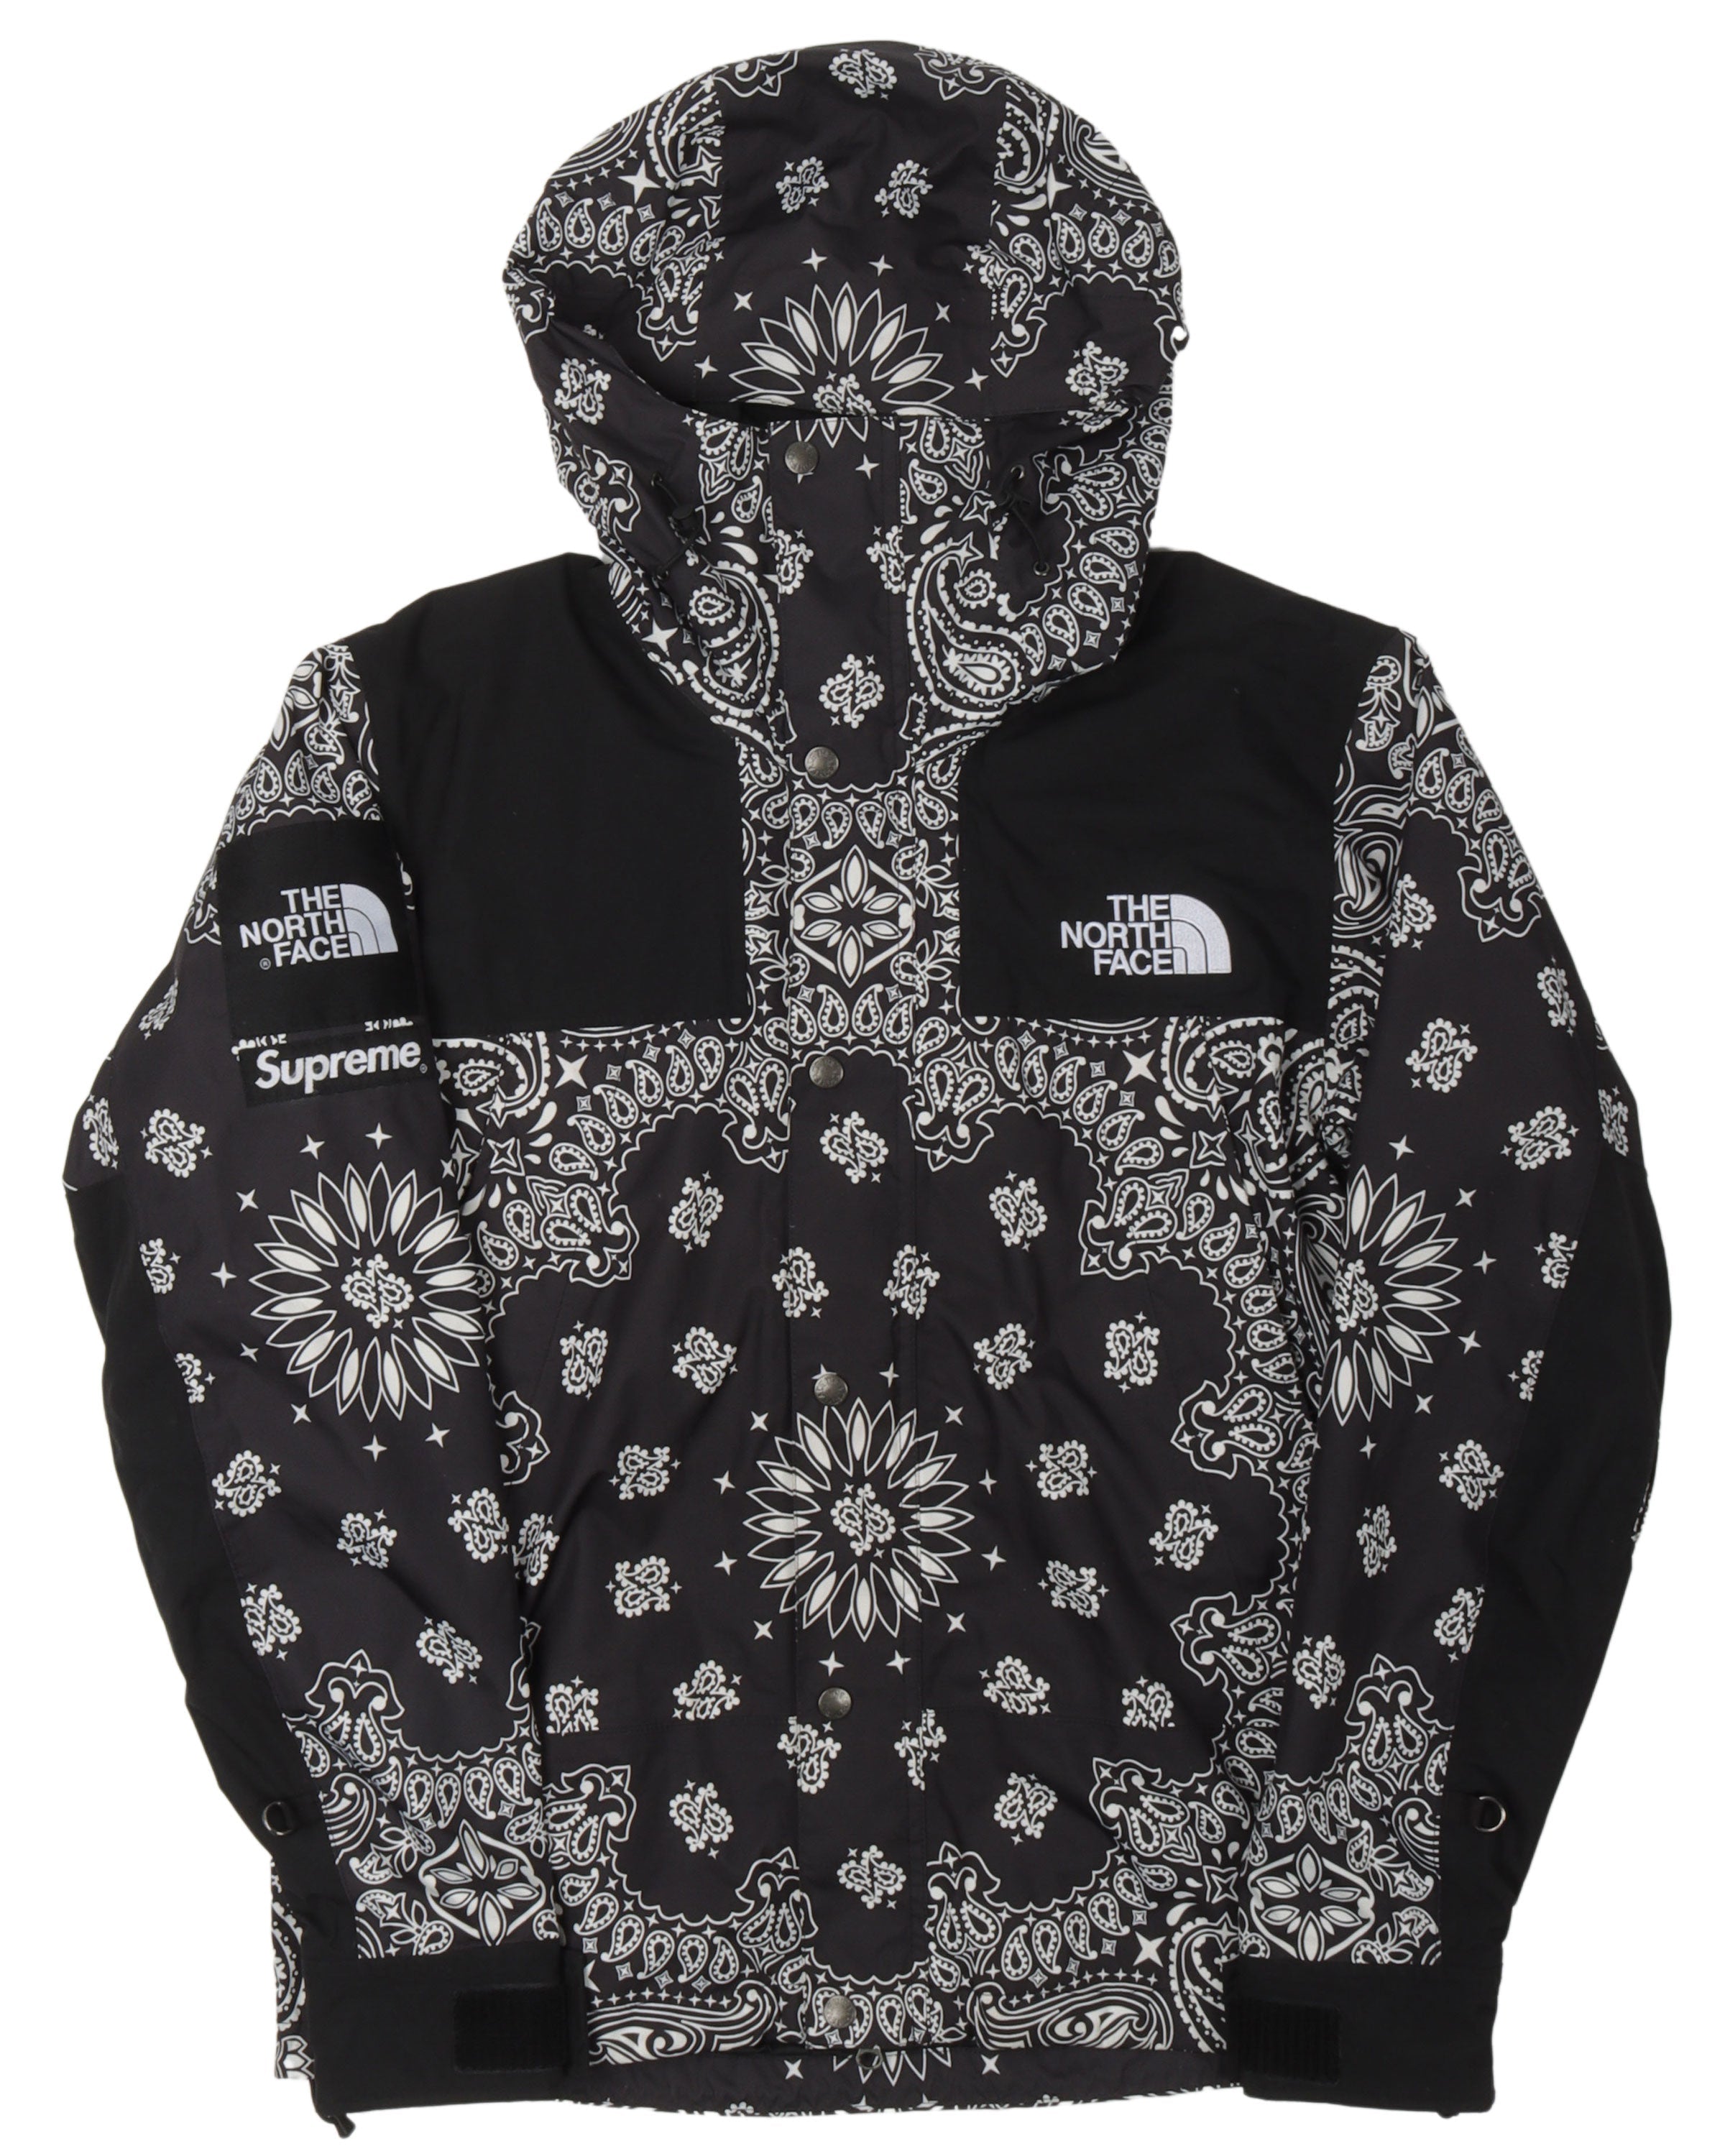 FW14 The North Face Paisley Mountain Parka